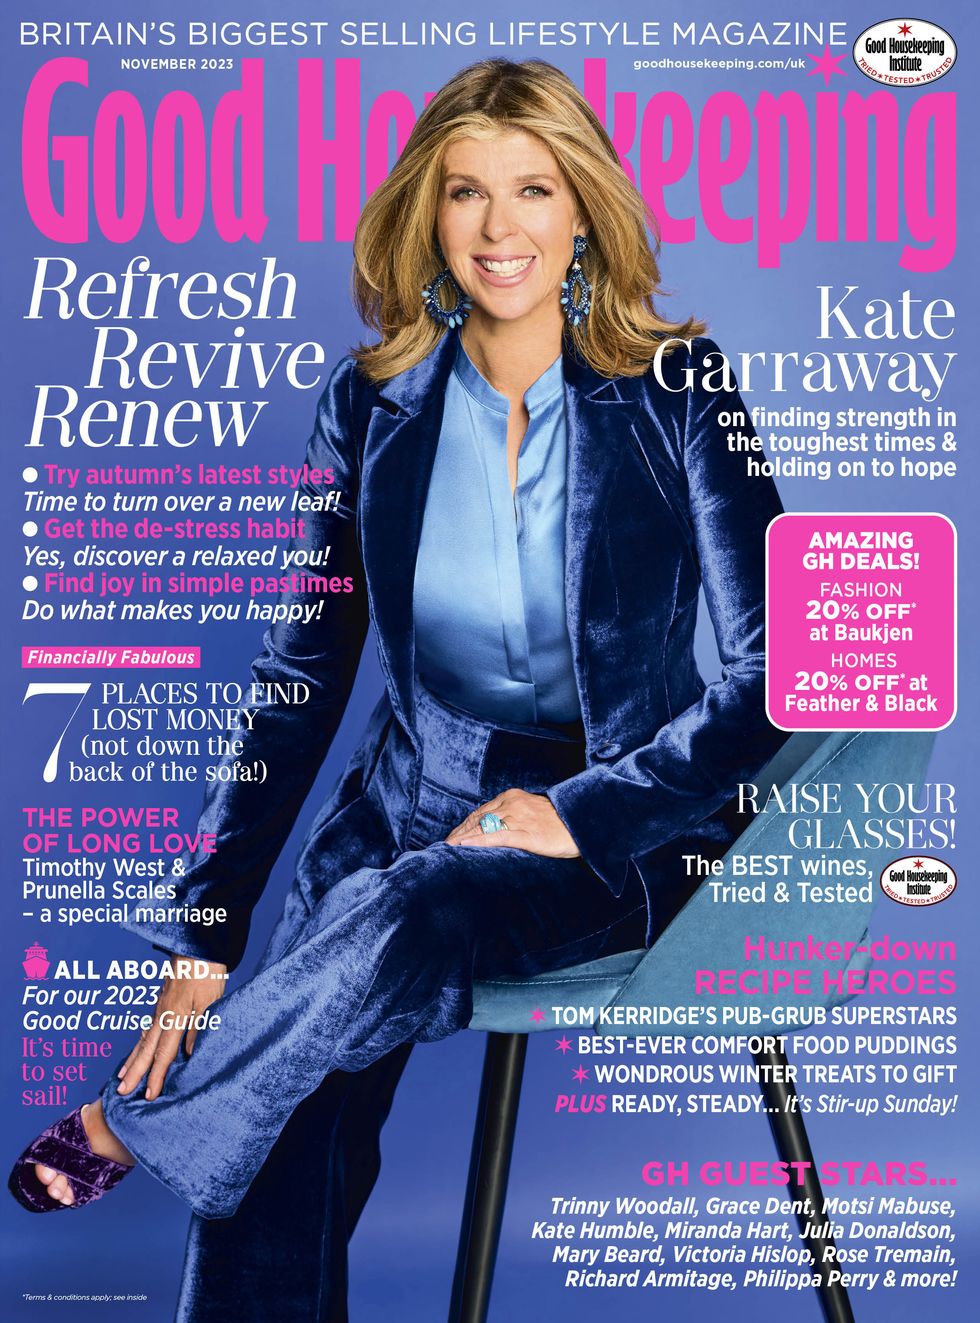 Kate Garraway shares what the last few years have taught her